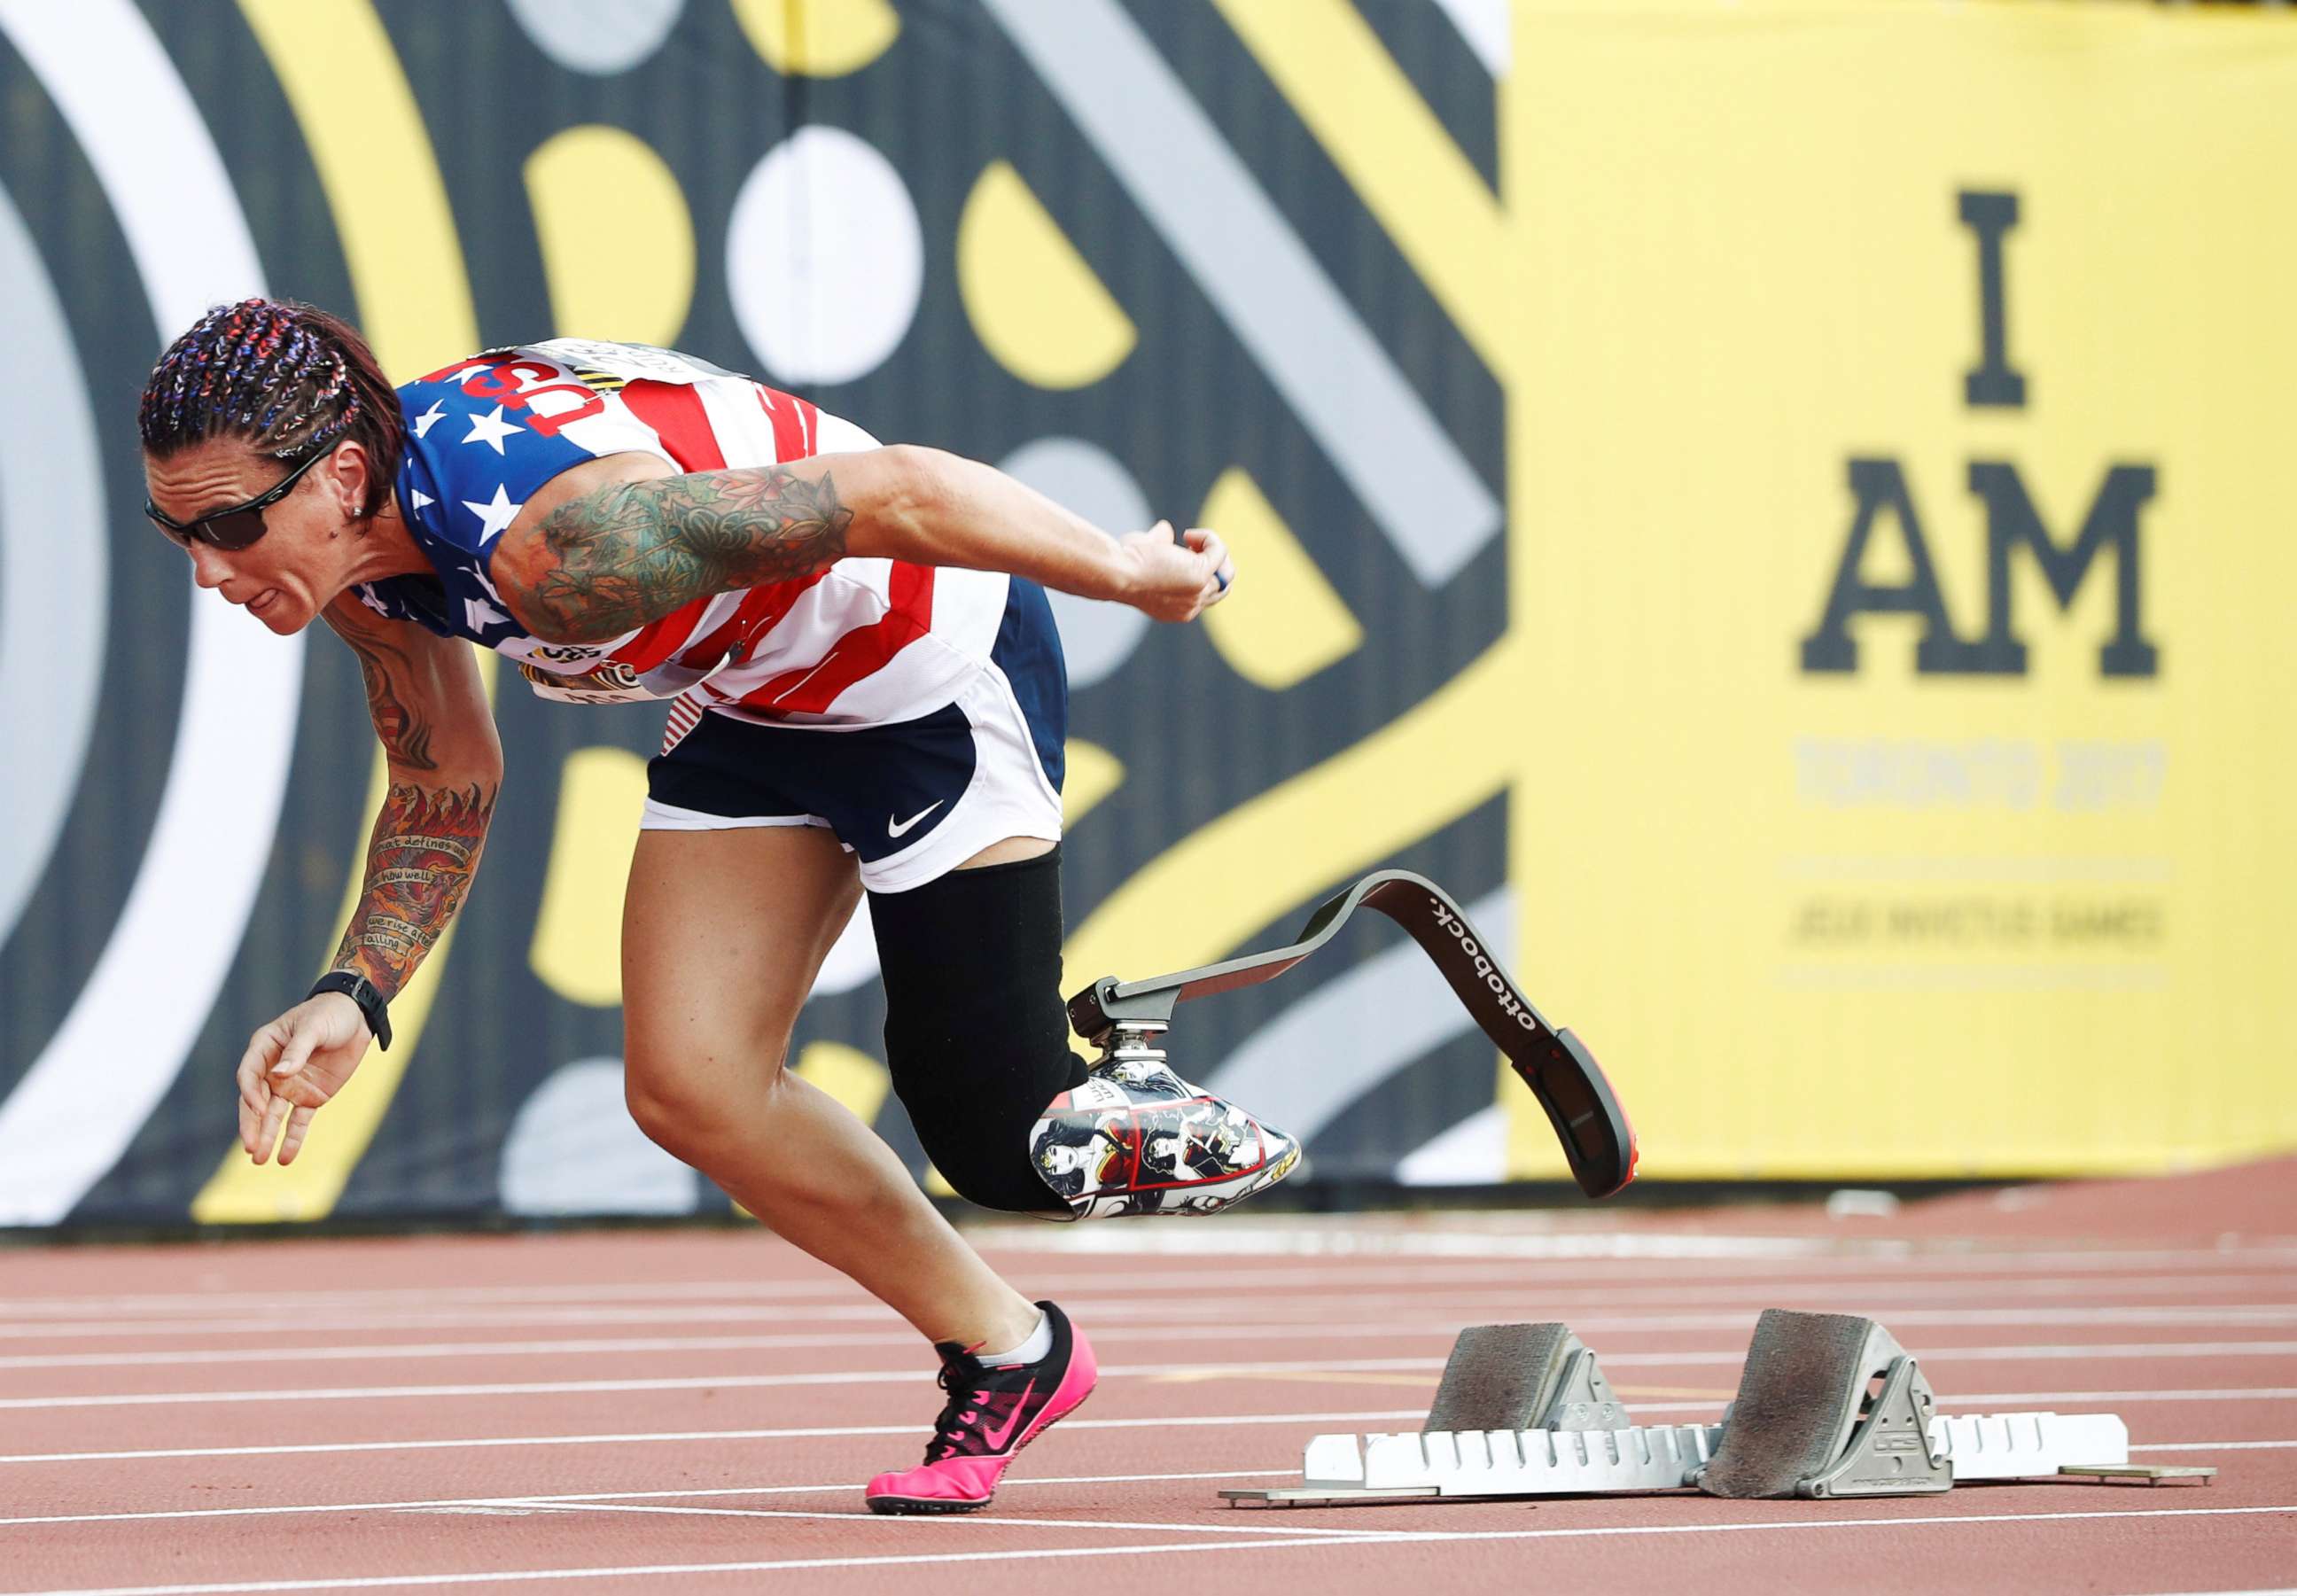 PHOTO: Sarah Rudder of the U.S. comes off the start blocks to win gold in the women's IT1/IT2/IT3 200m final during the athletics at the Invictus Games in Toronto, Sept. 24, 2017.